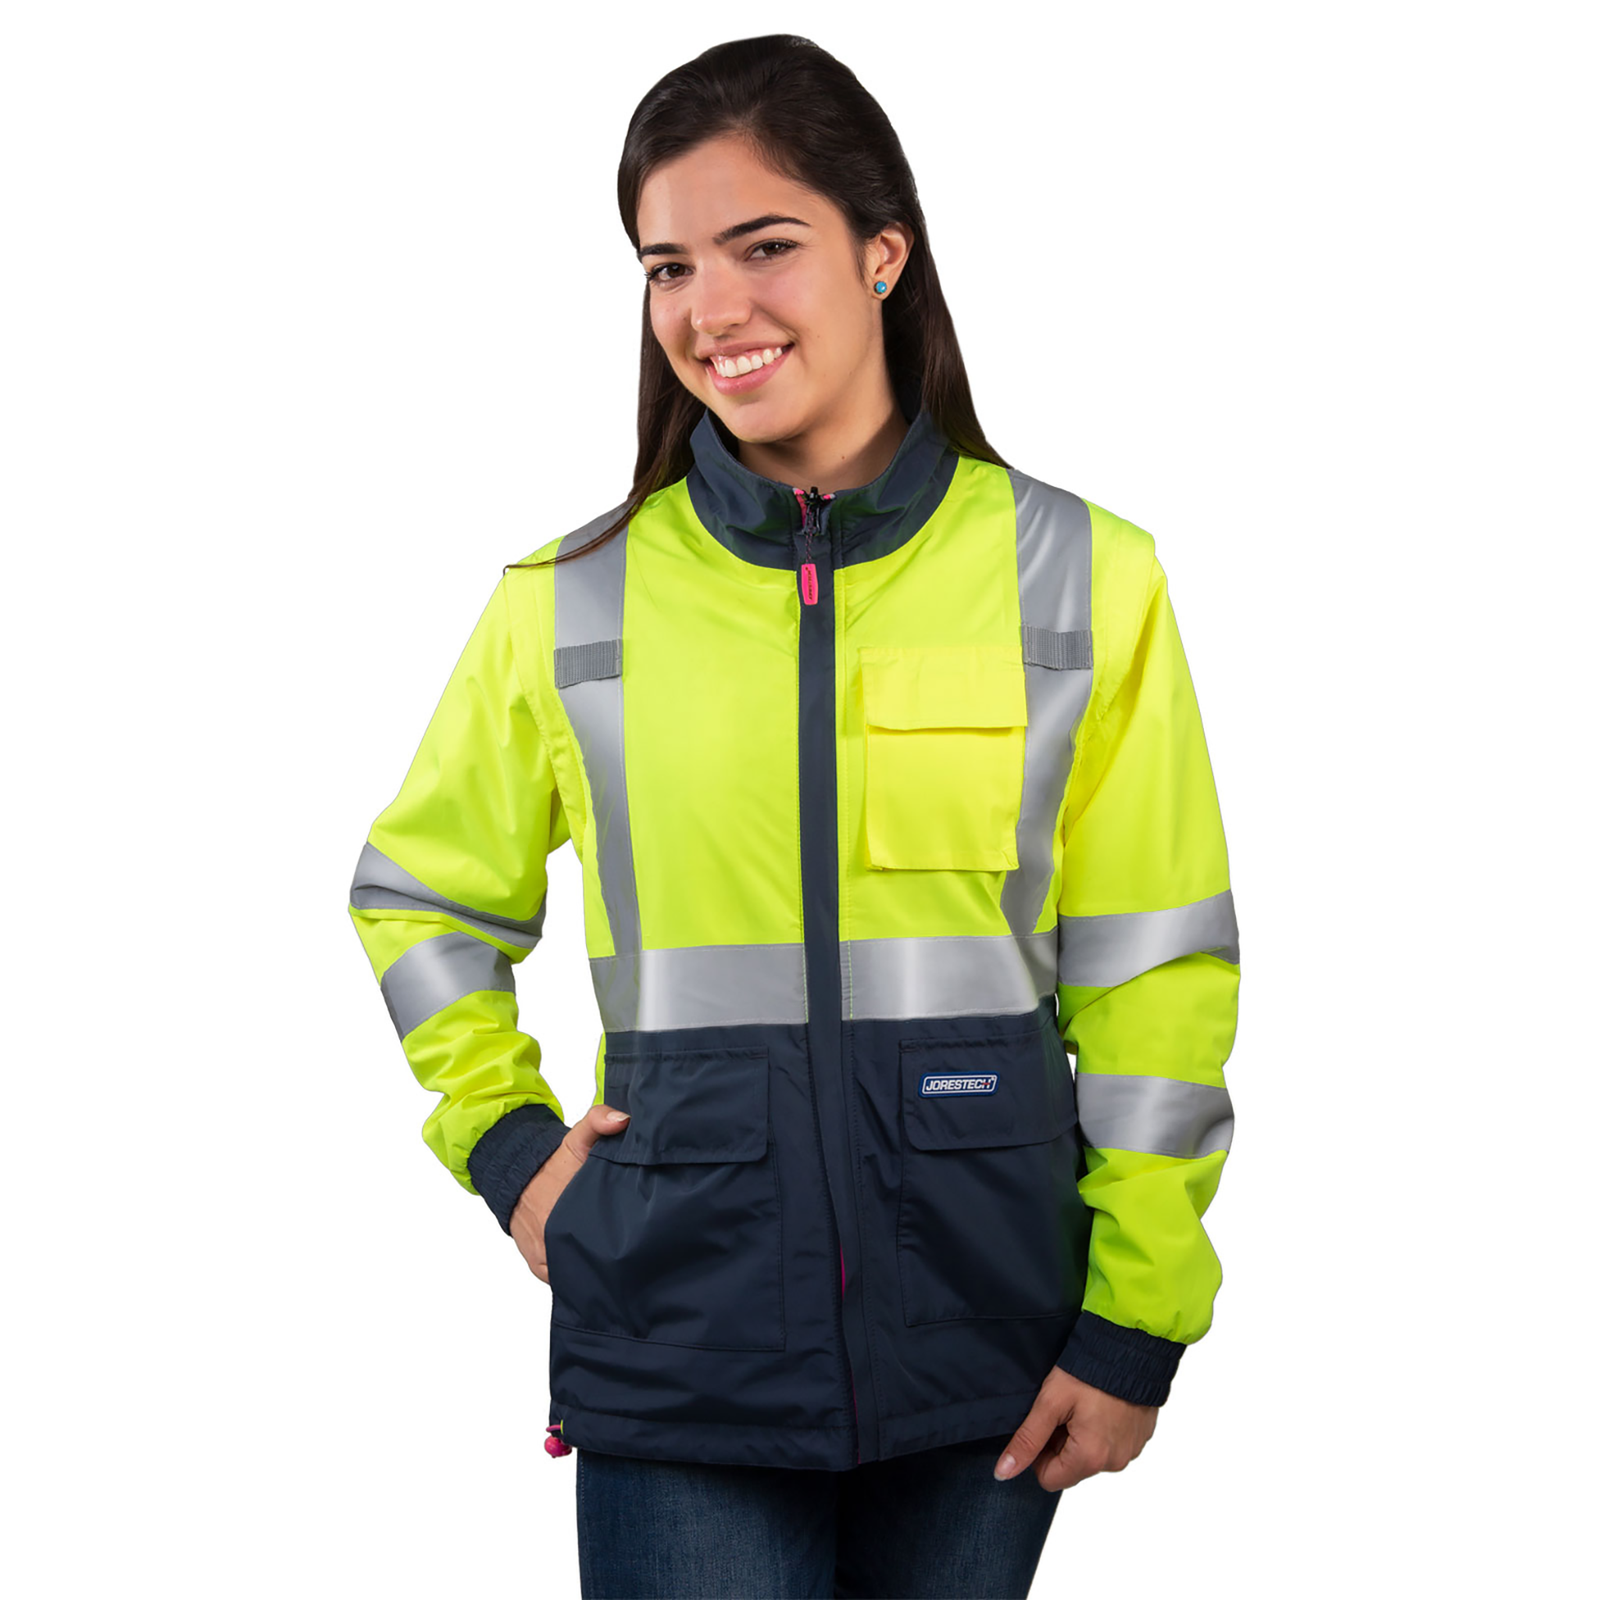 4-in-1 Reversible Safety Jacket & Vest with Removable